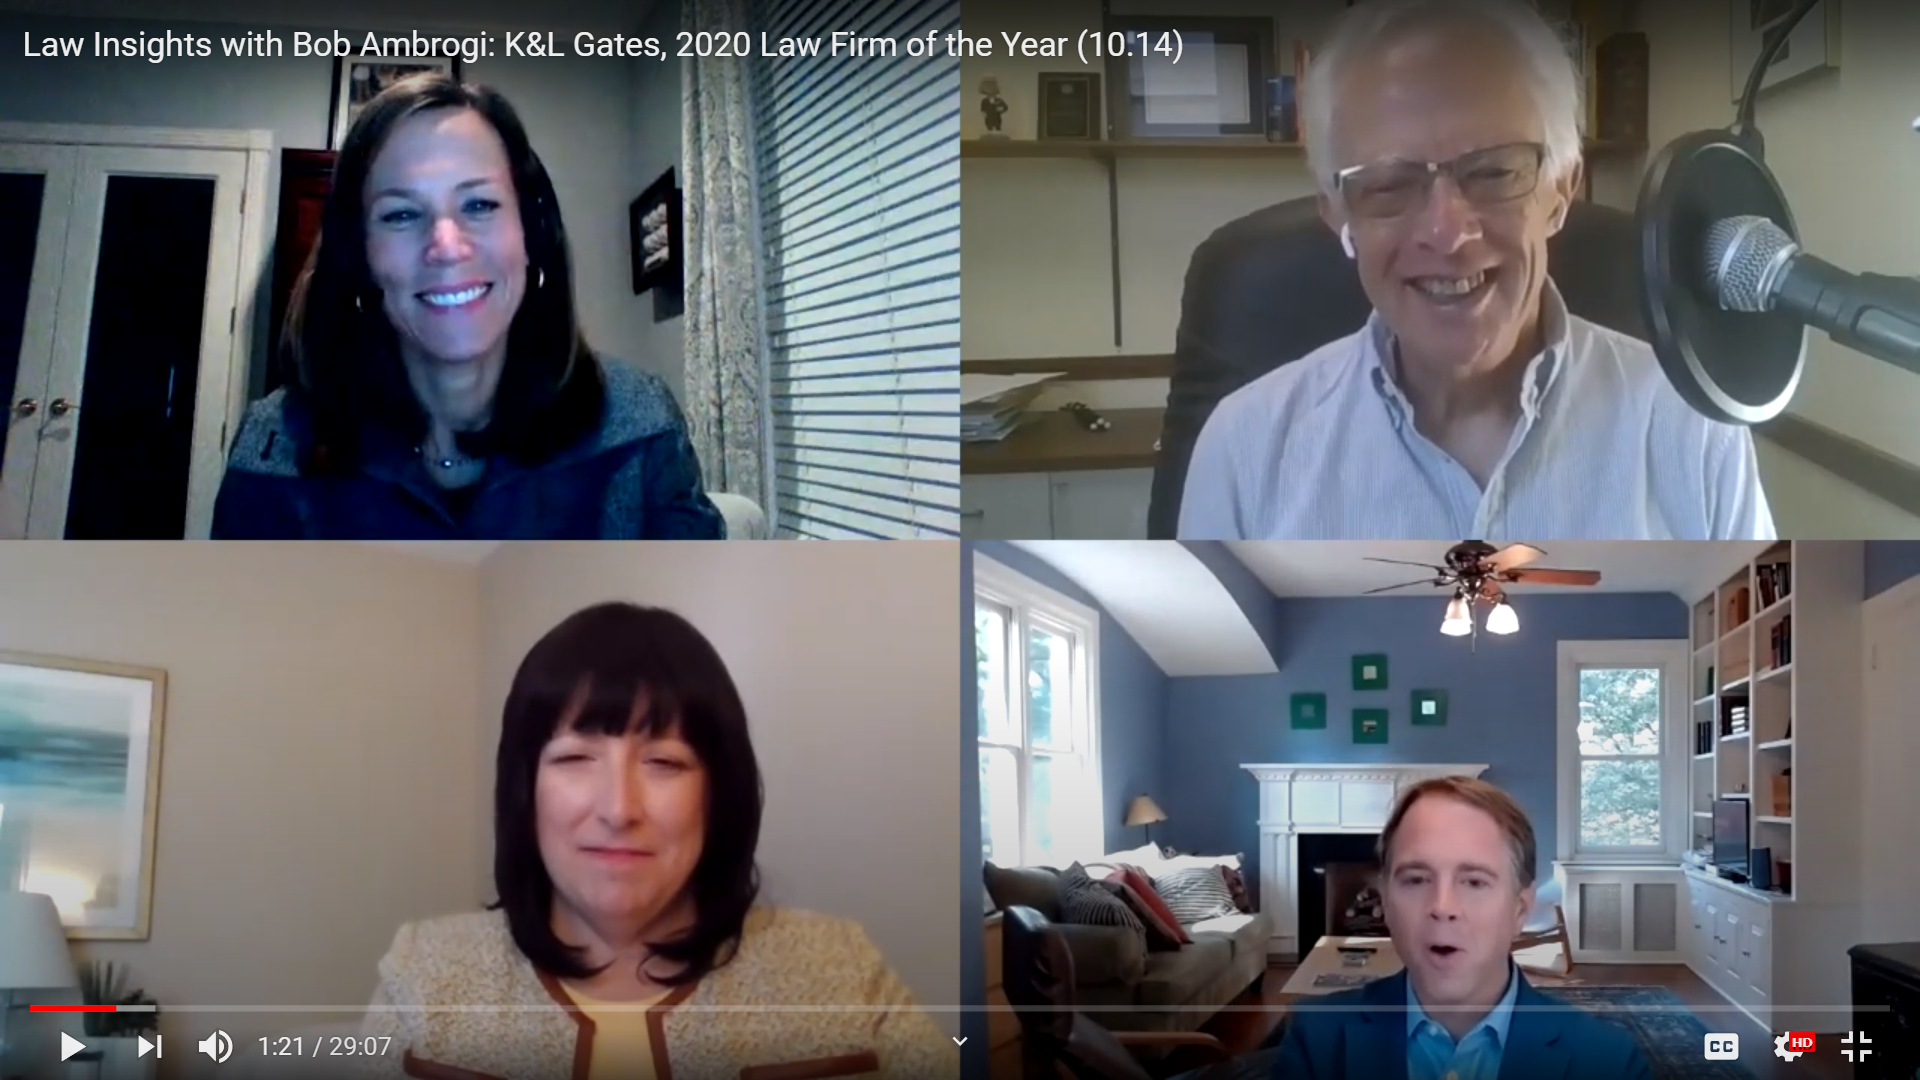 &#8216;People Innovate, Technology Facilitates&#8217; &#8211; A Conversation About Innovation At K&#038;L Gates